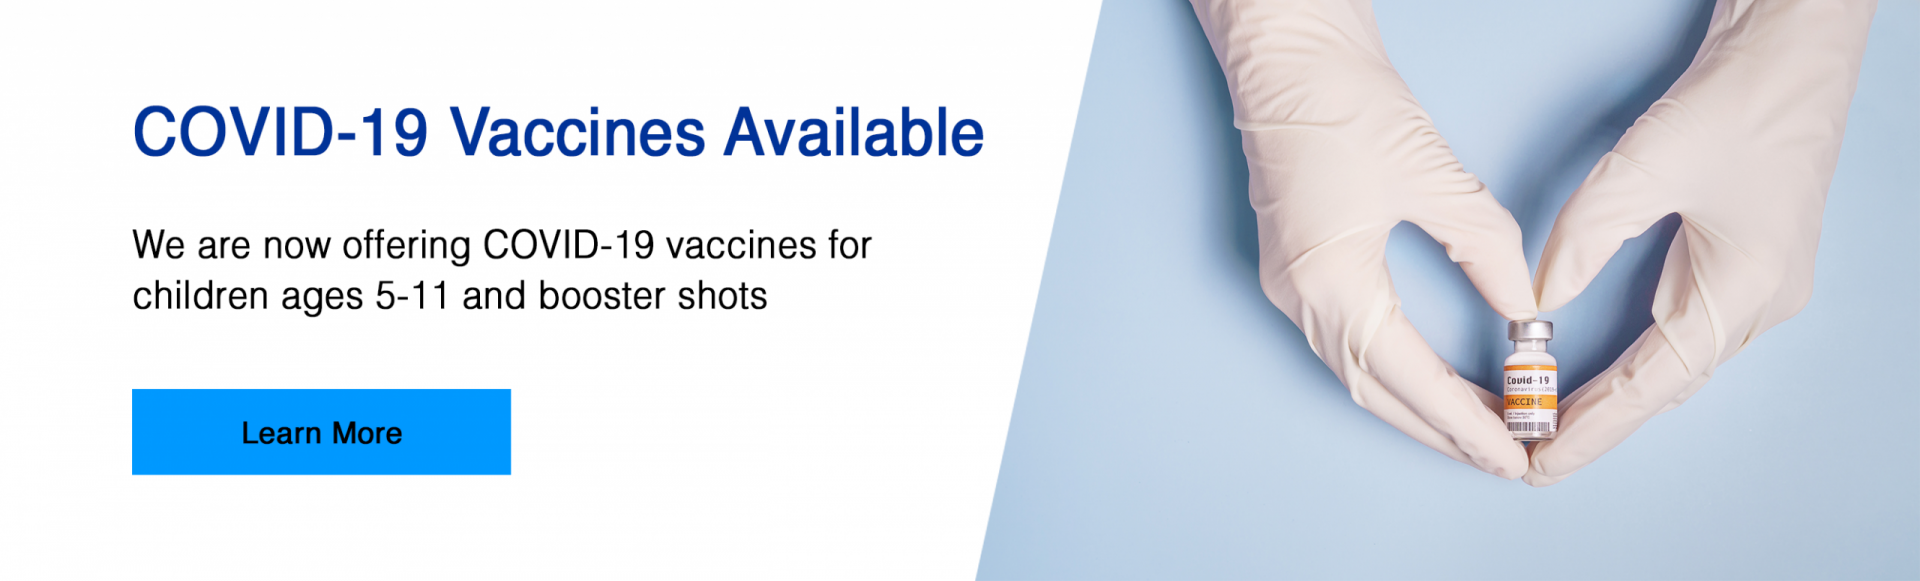 COVID-19 vaccines for kids 5-11 and boosters